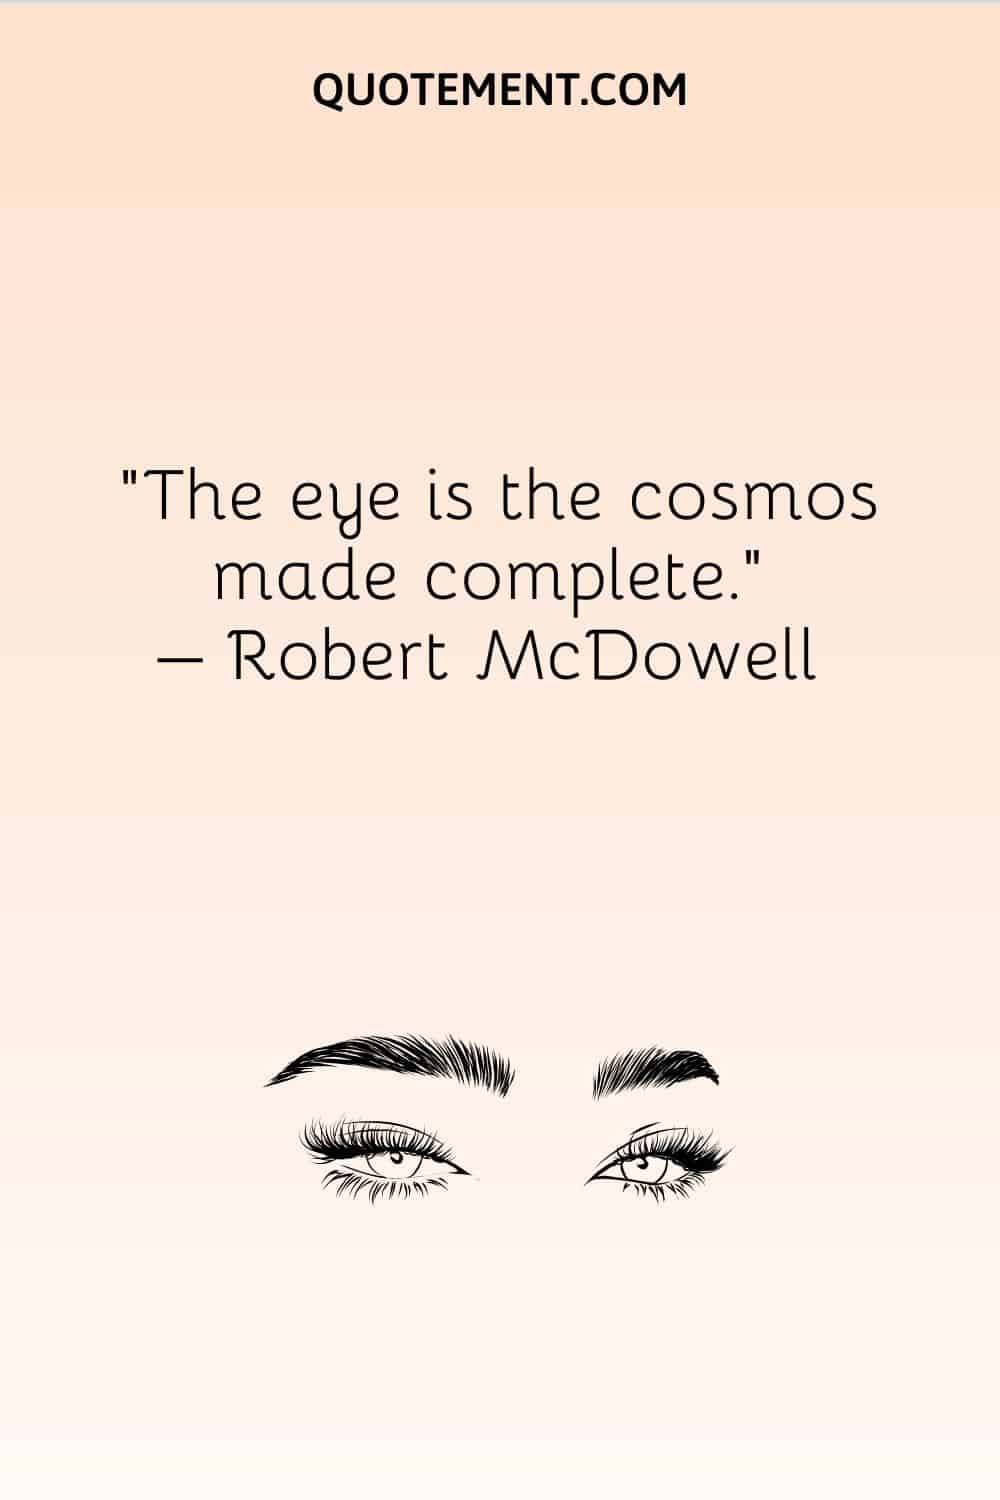 The eye is the cosmos made complete